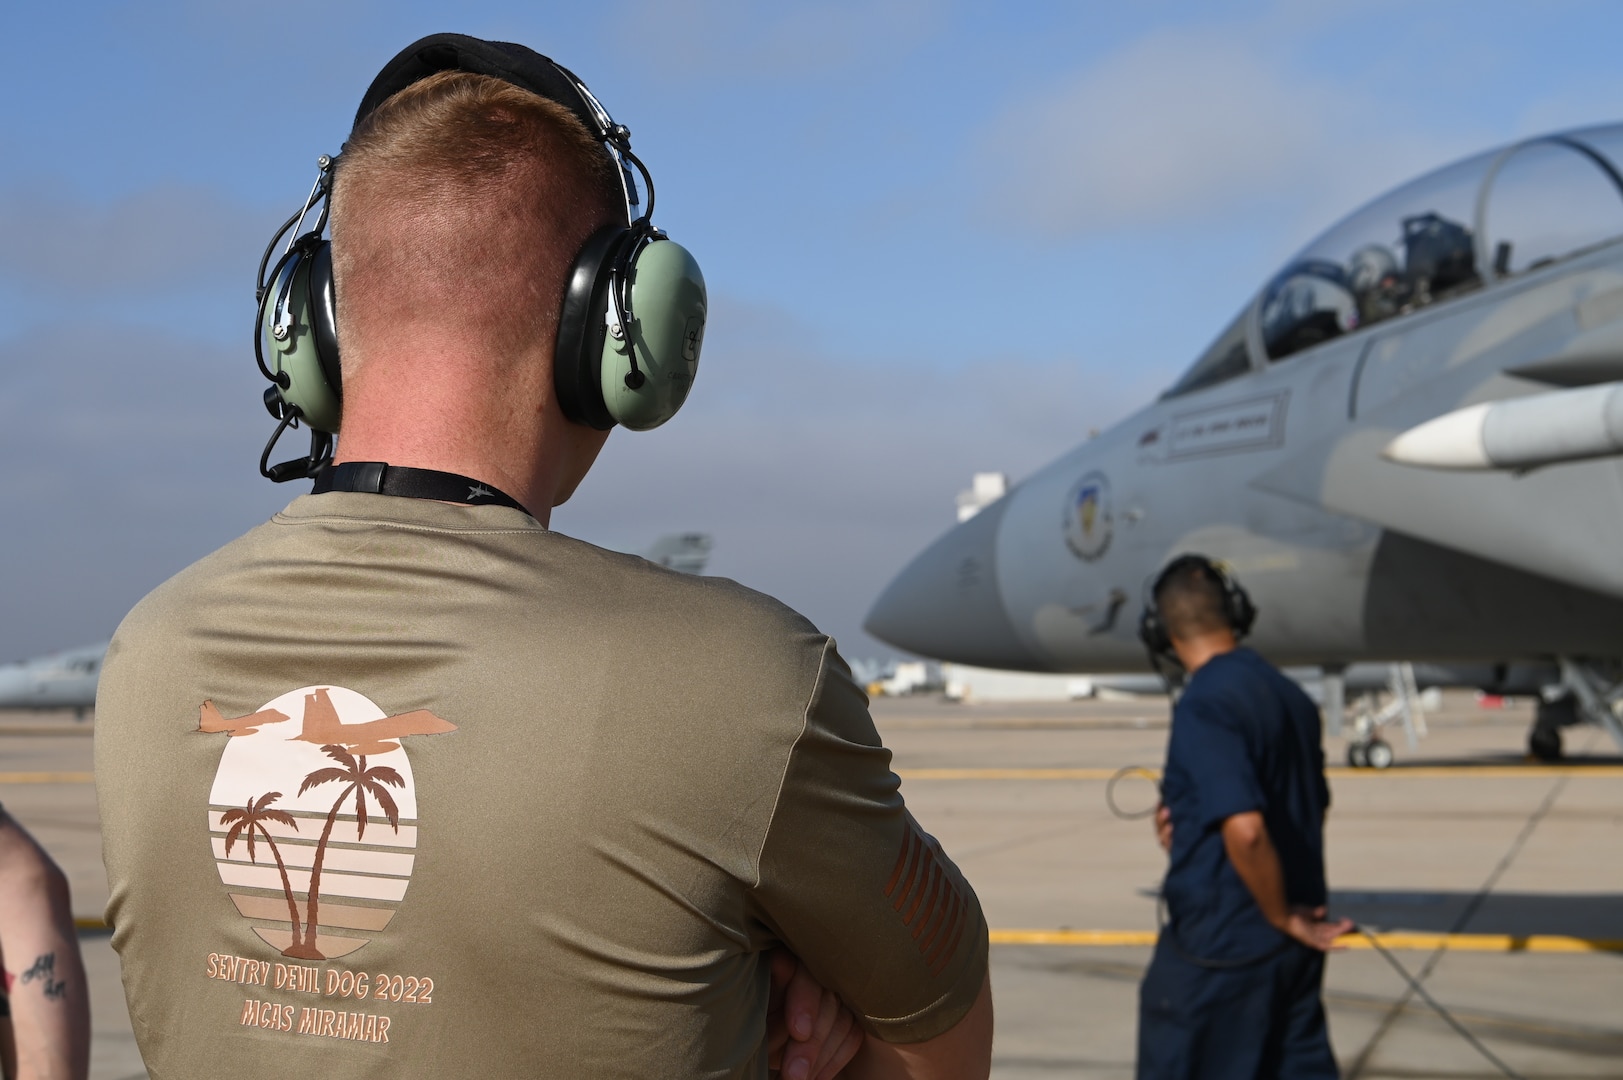 U.S. Air Force Tech. Sgt. Cody Burkett, 173rd Fighter Wing, Oregon Air National Guard, observes preflight operations at Marine Corps Air Station Miramar in California Aug. 15, 2022. The 173rd Fighter Wing spent two weeks flying and training with the F/A-18s from the Marine Fighter Attack Training Squadron 101 and the F-35s from the Marine Fighter Attack Training Squadron 502.